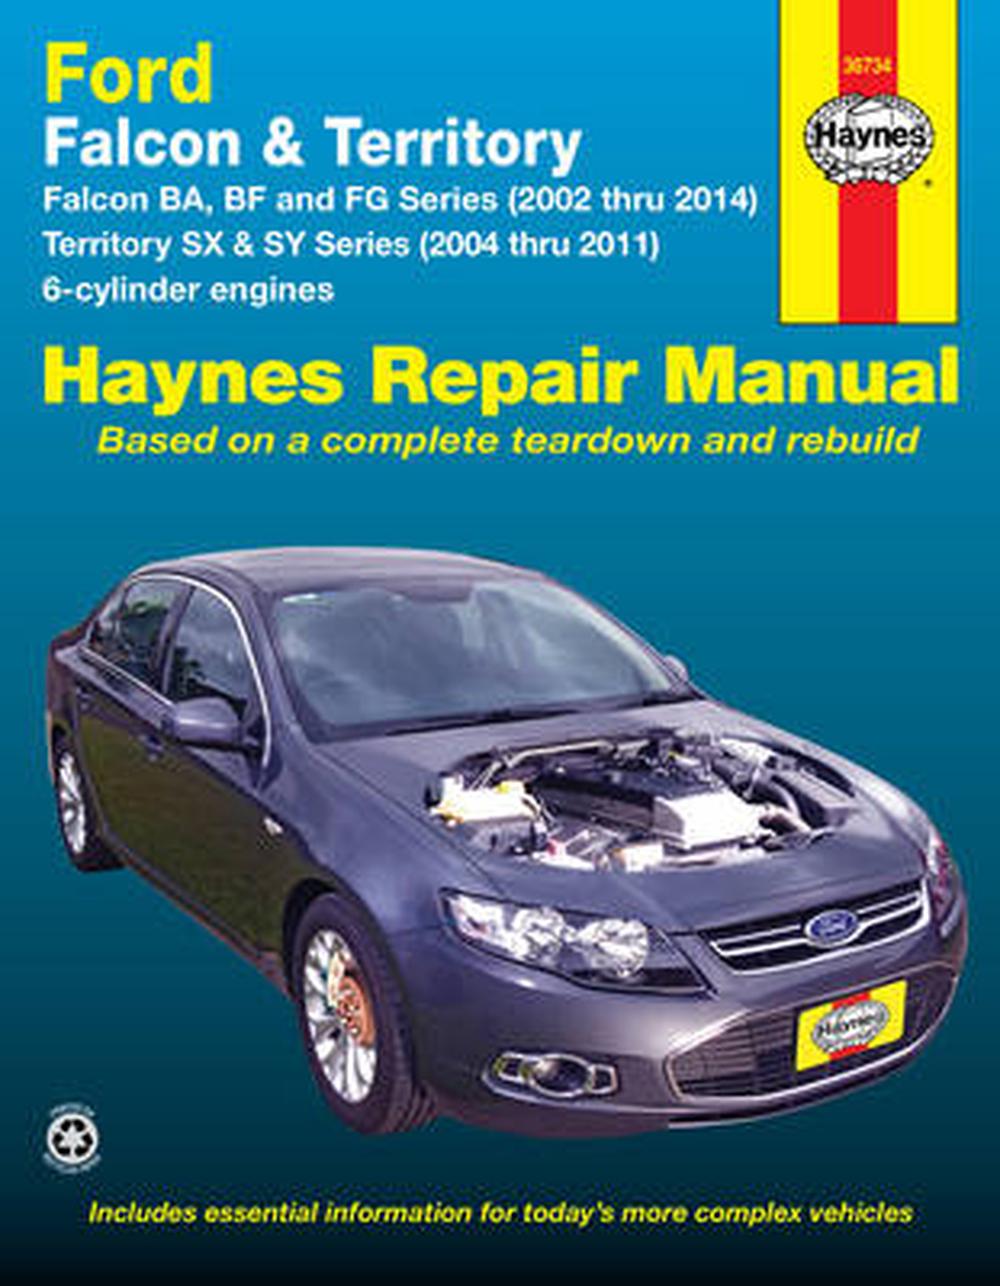 Ford Falcon / Ford Territory Automotive Repair Manual 20022014 by